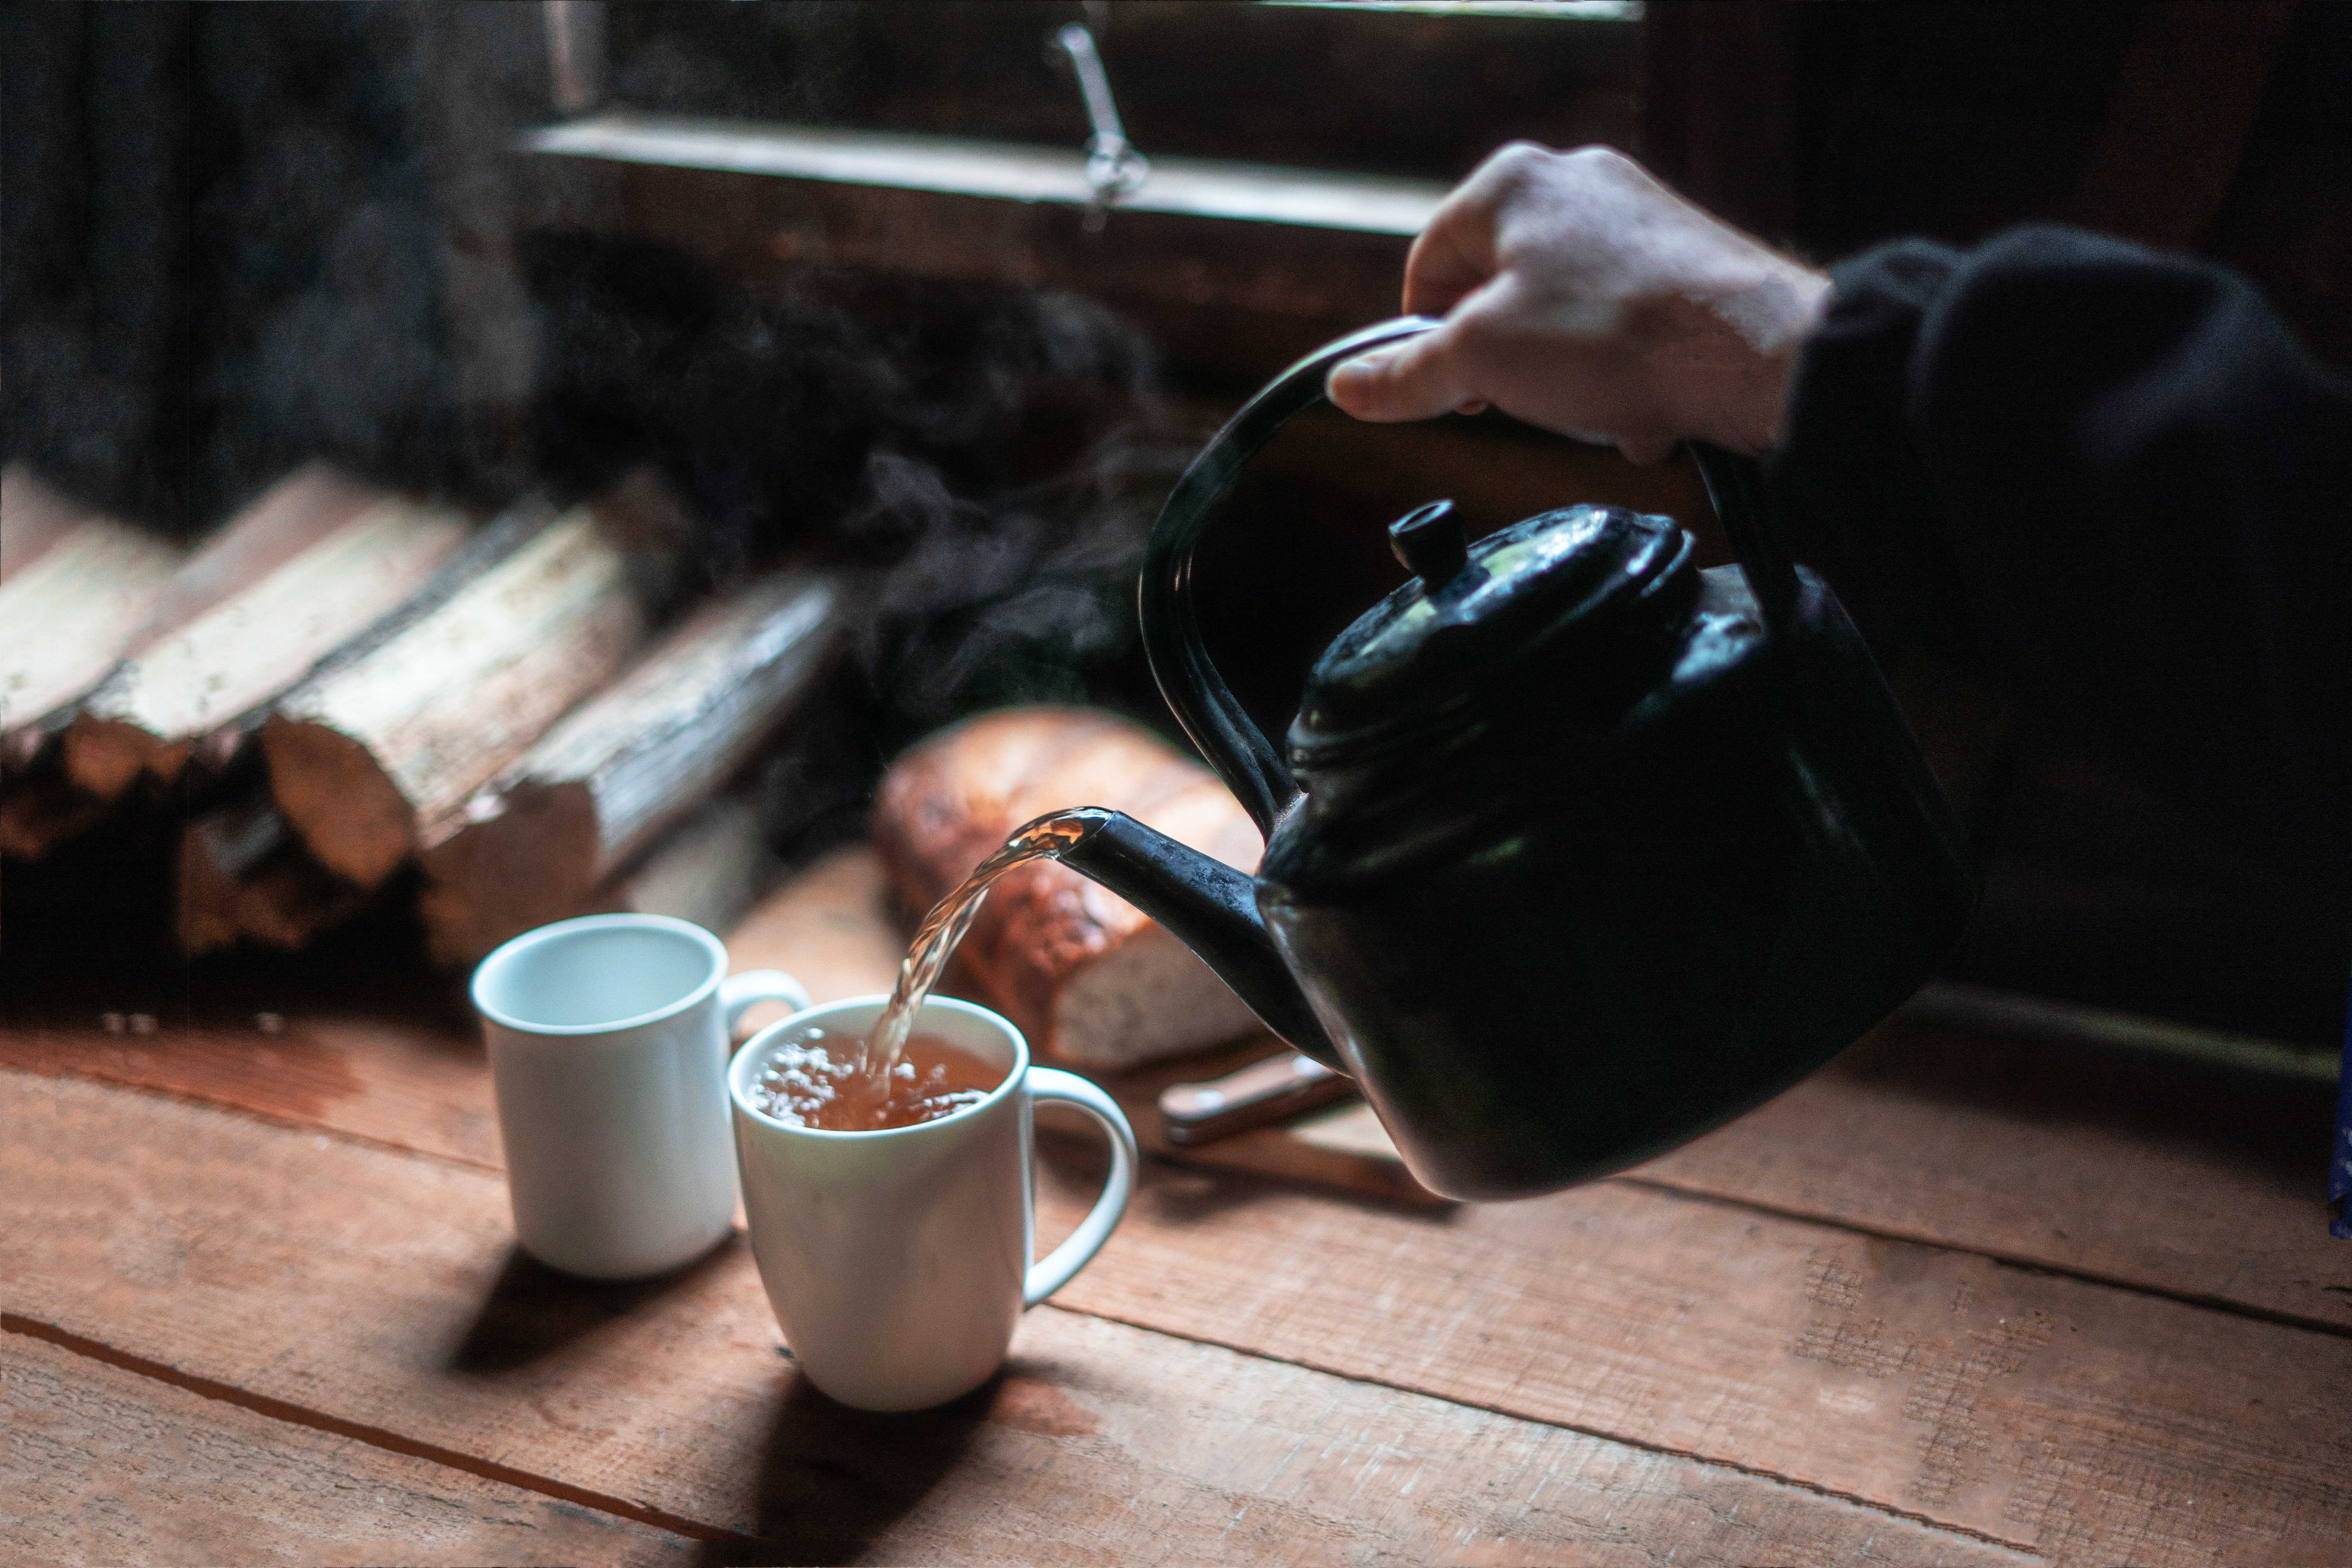  Phillip welcomed the man into his home, made him a cup of tea, and served him | Source: Pexels